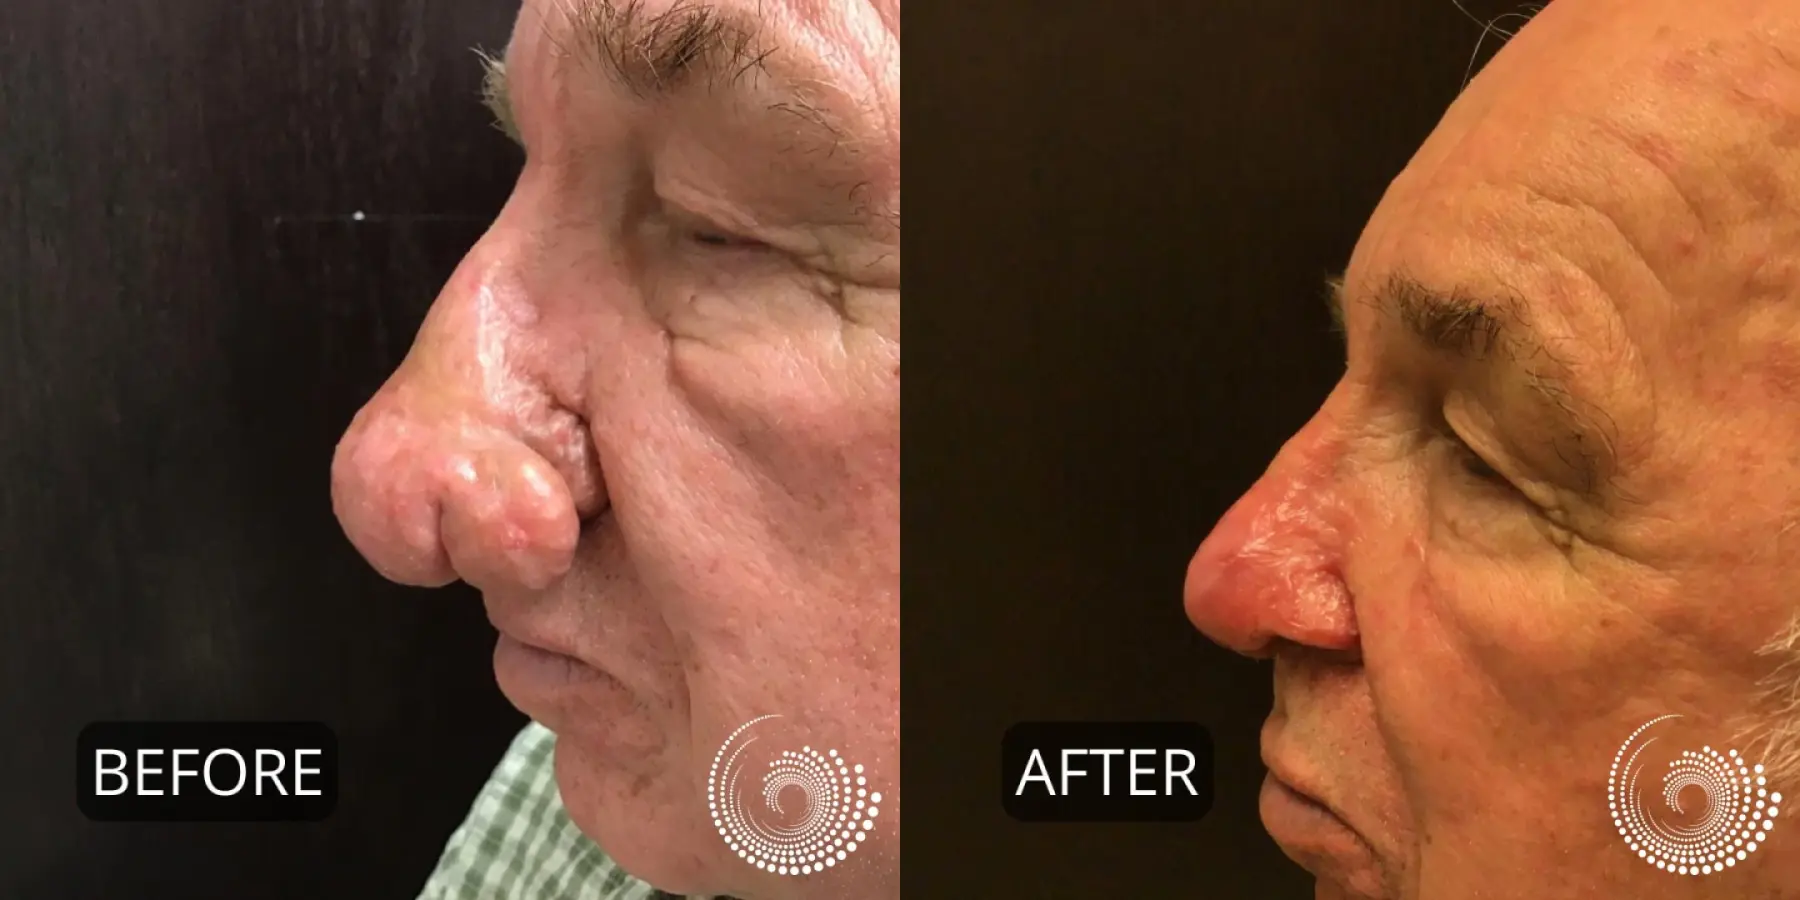 Rhinophyma treatment to reshape nose - Before and After